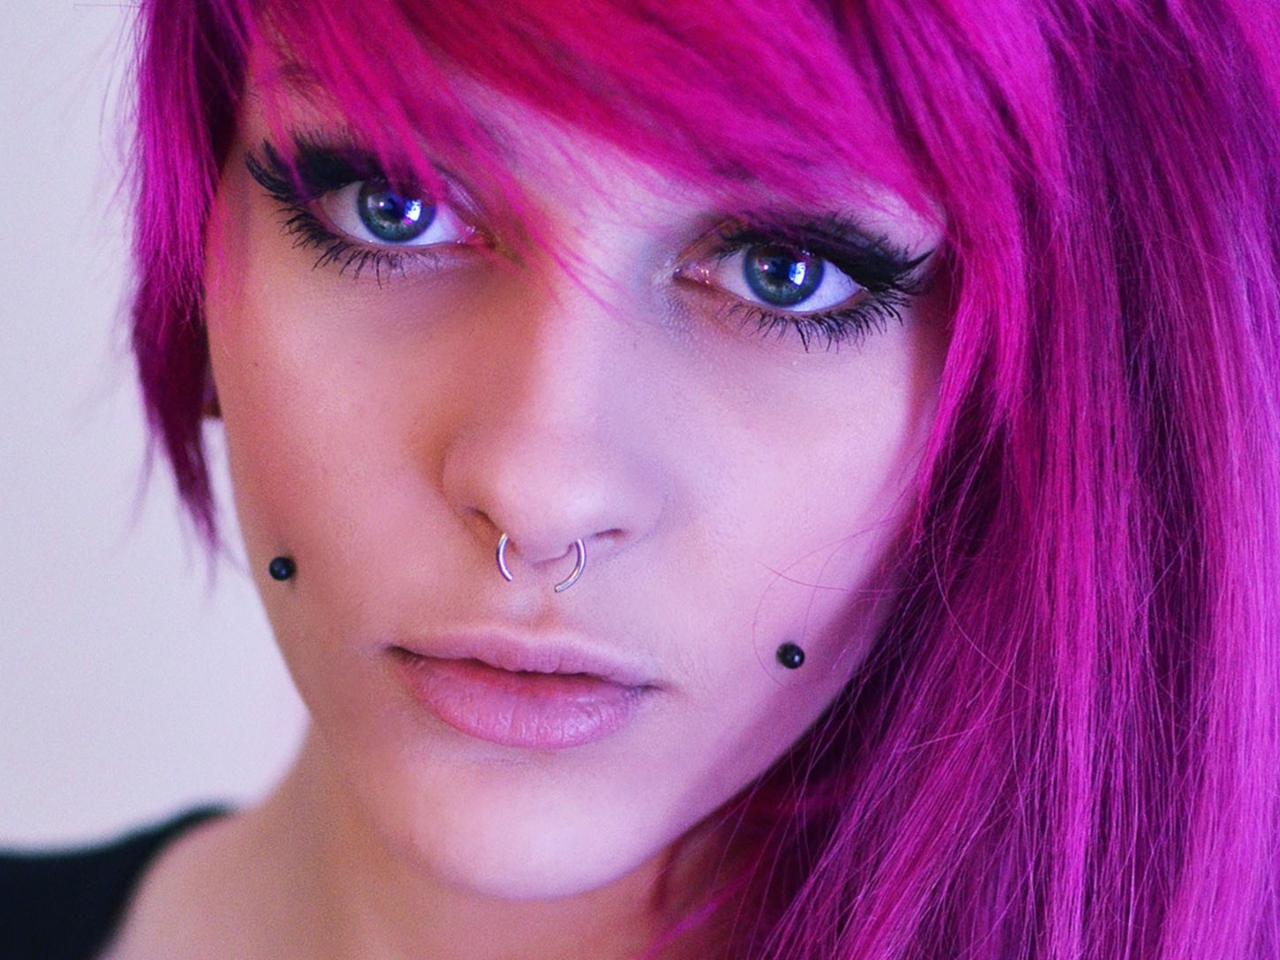 Pierced Girl With Pink Hair wallpaper 1280x960